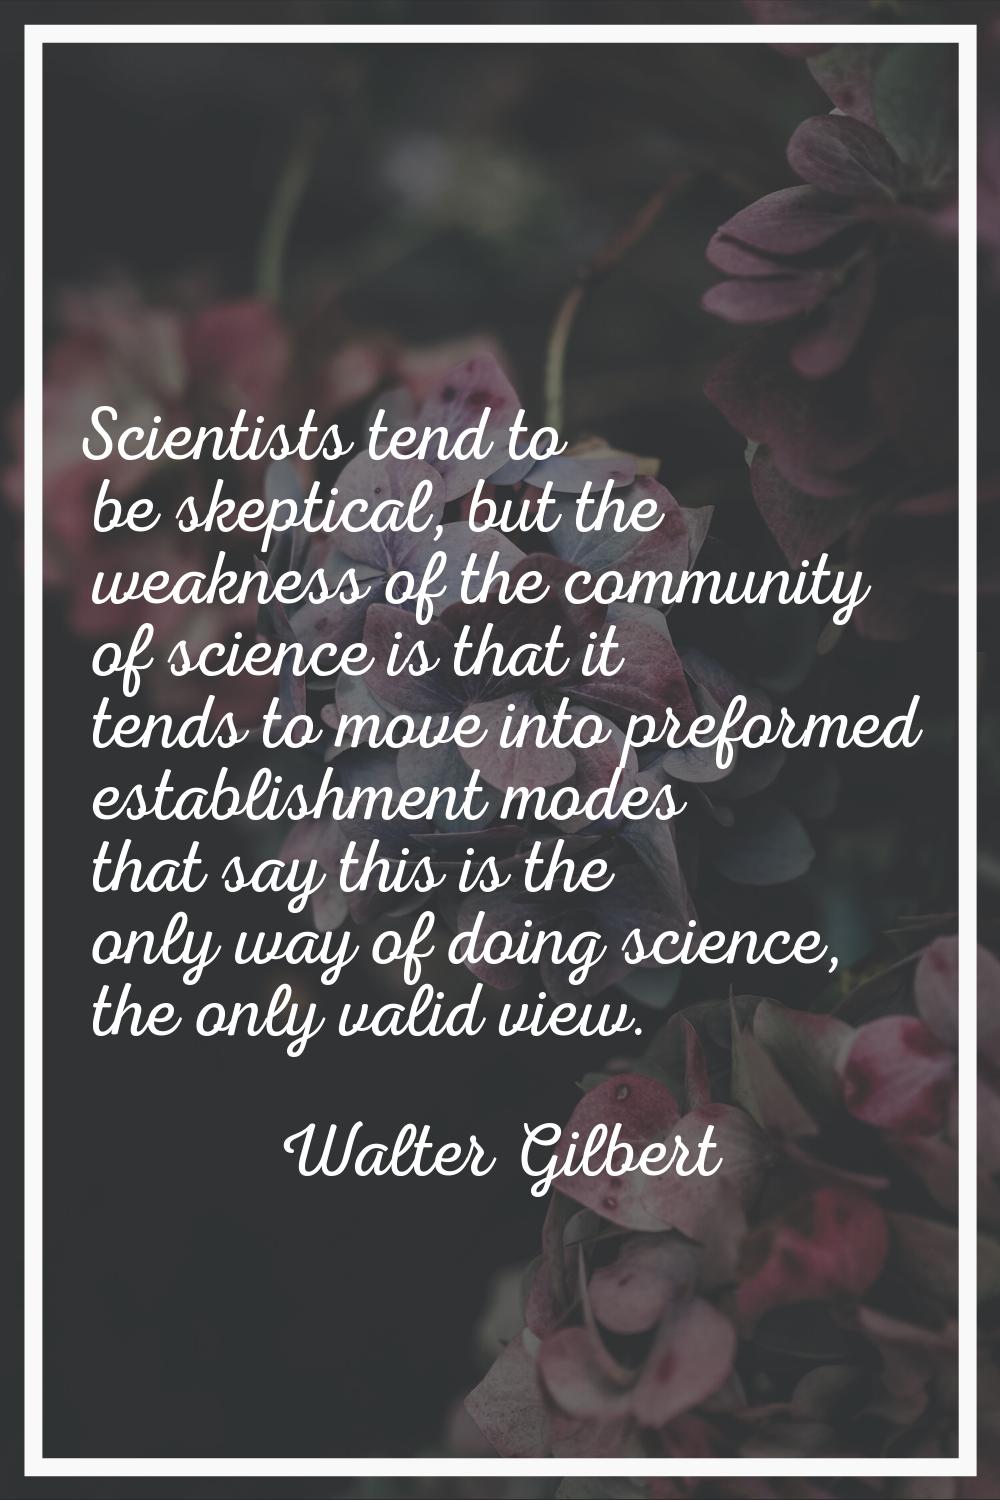 Scientists tend to be skeptical, but the weakness of the community of science is that it tends to m